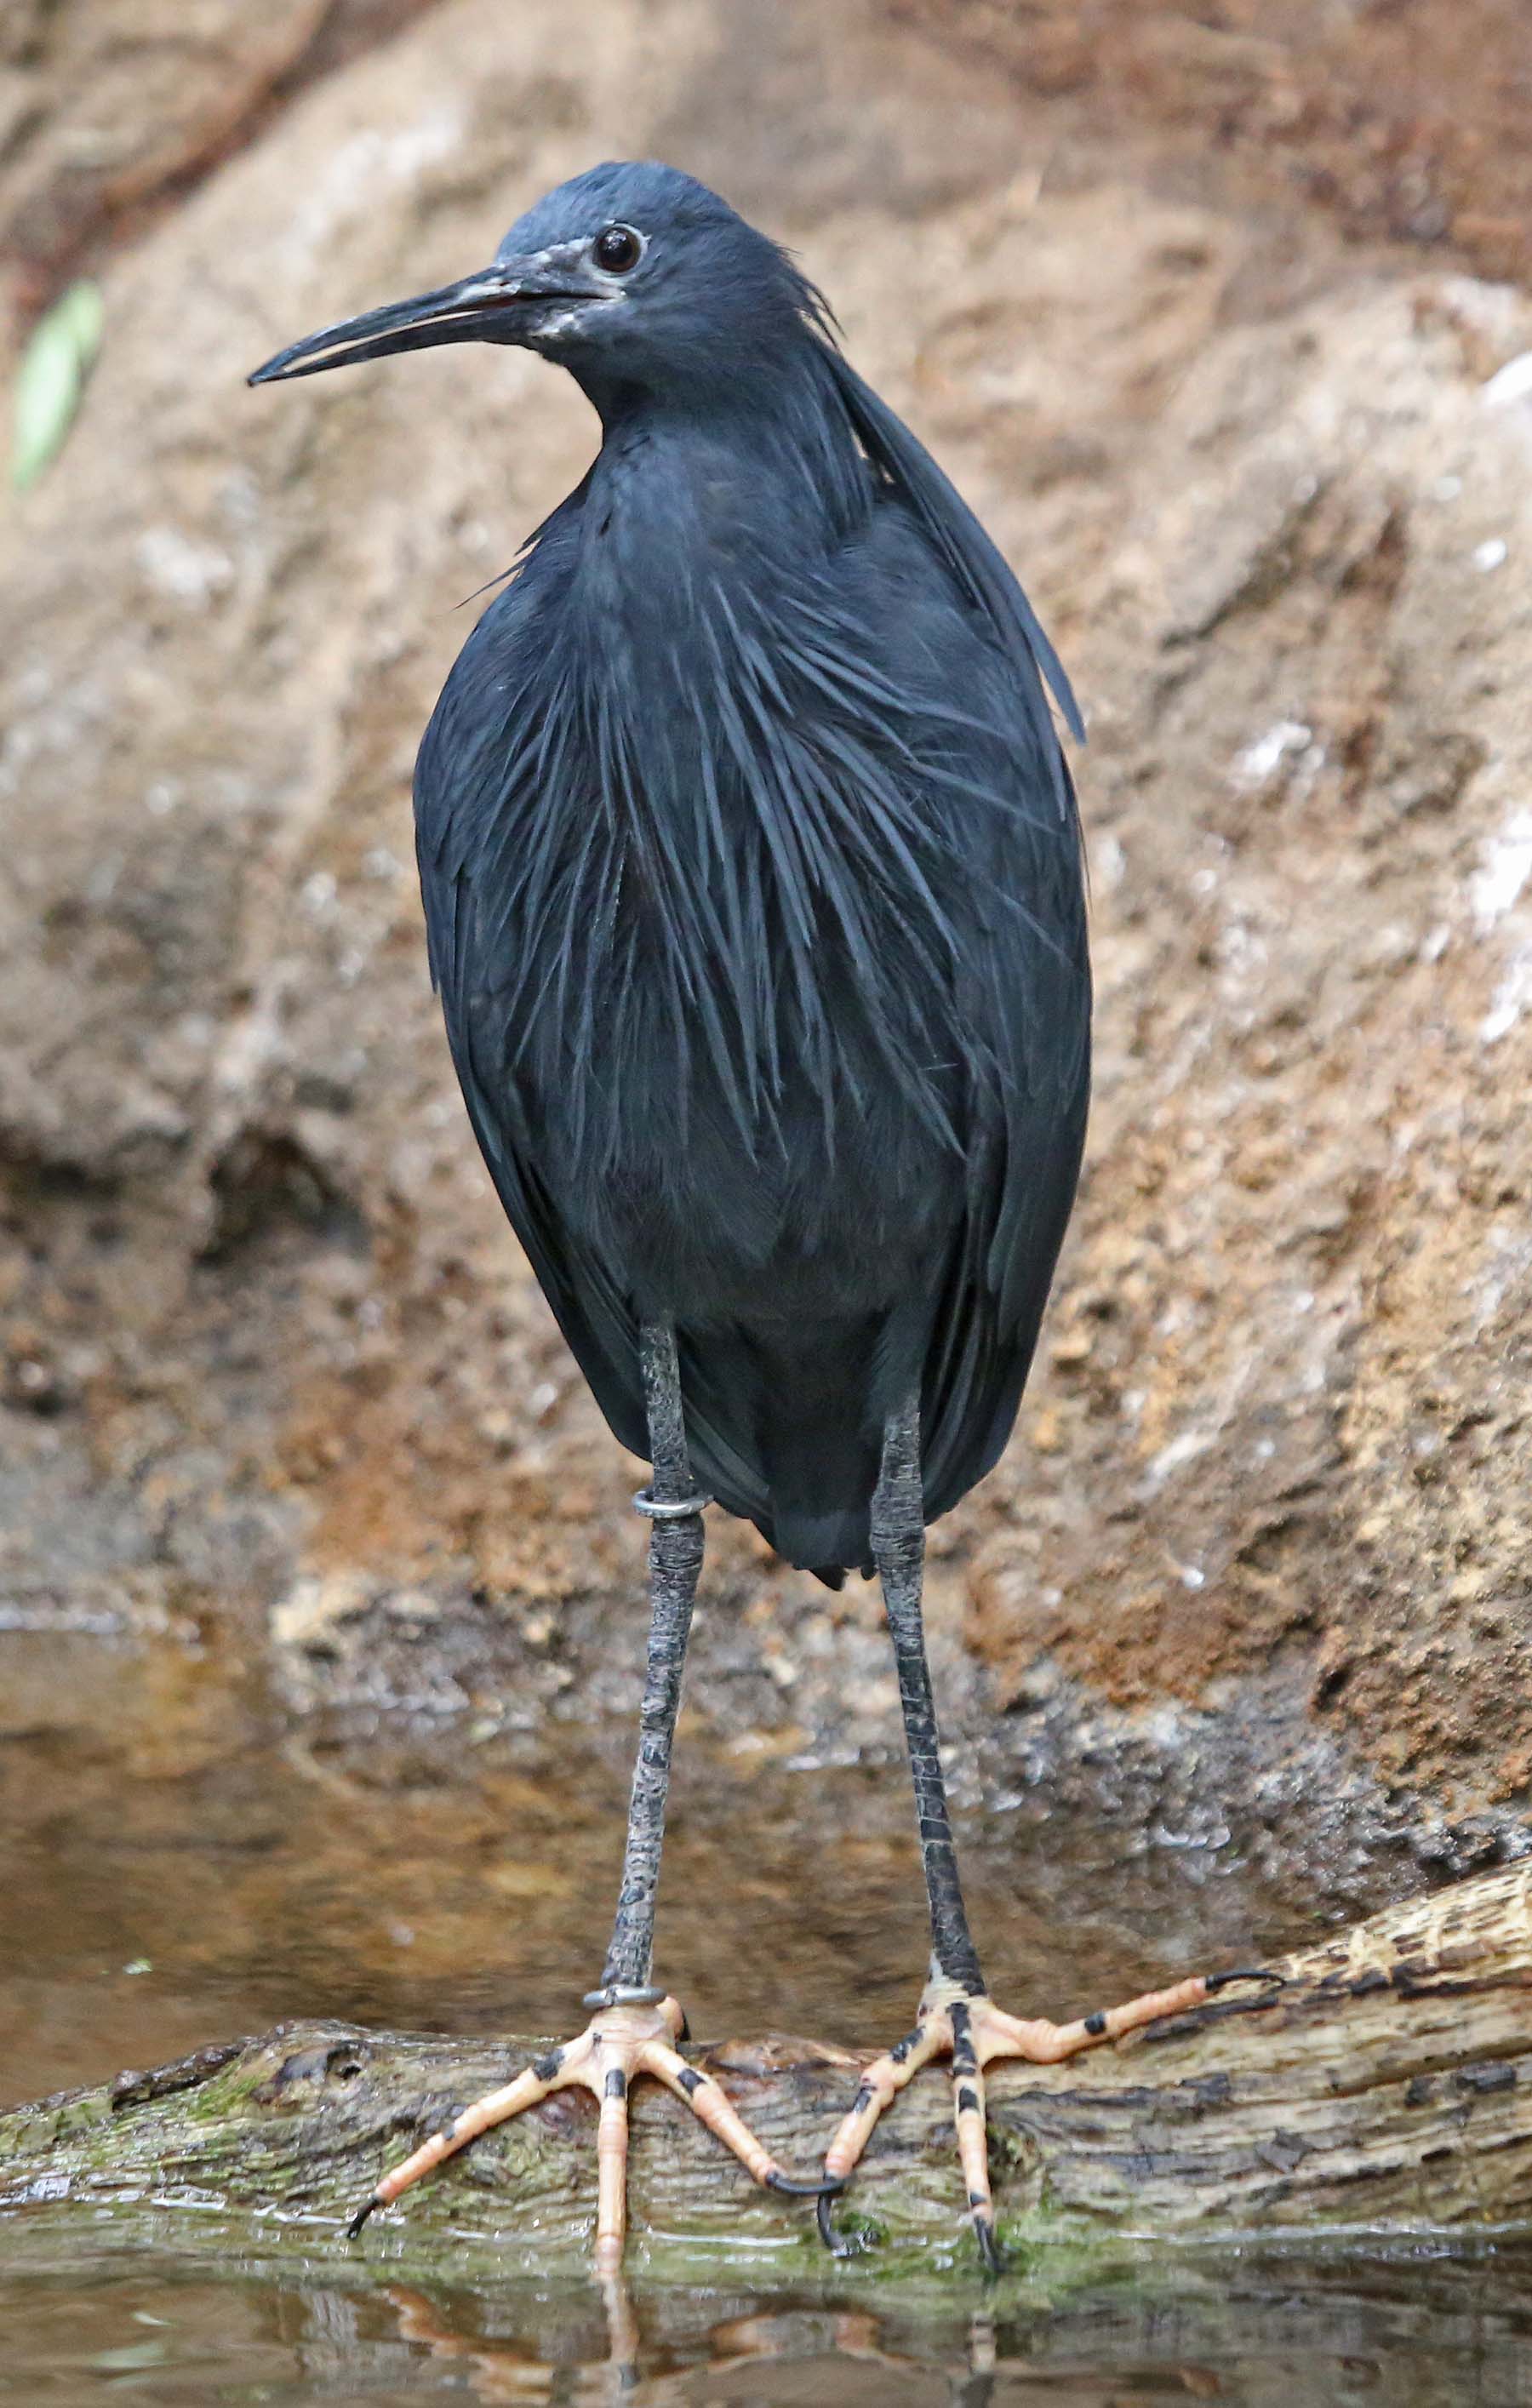 Pictures and information on Black Heron